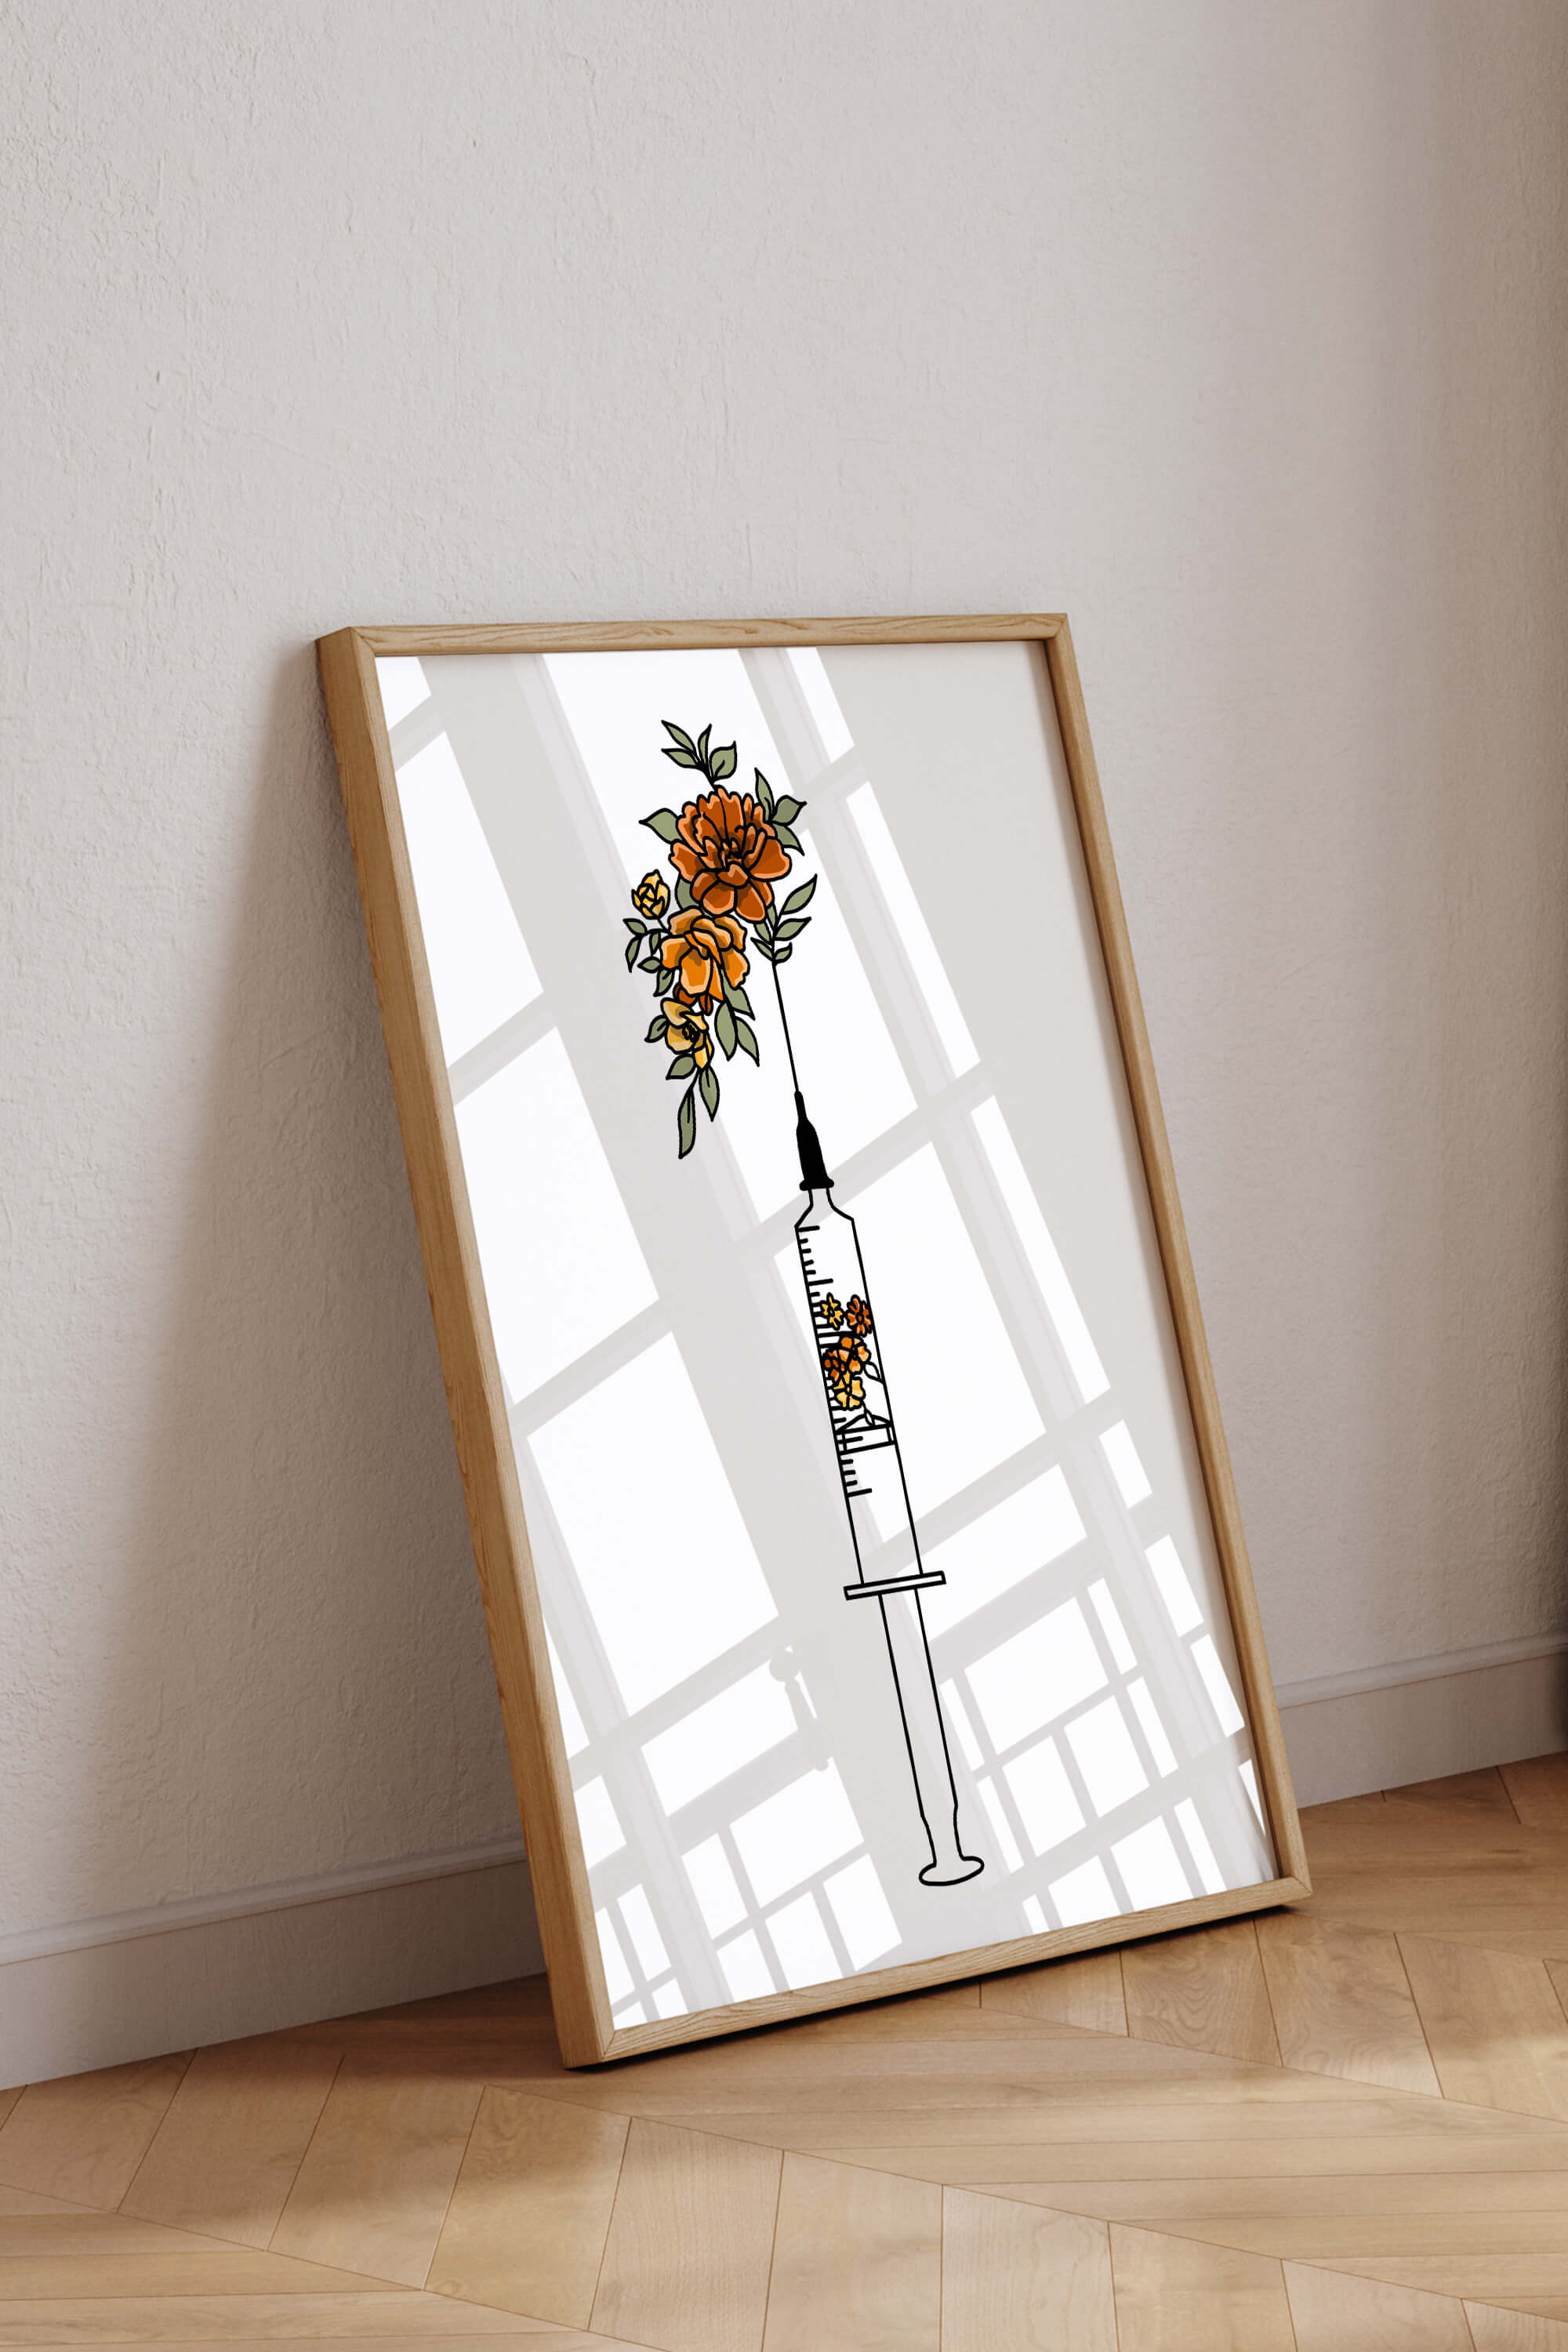 Vibrant Floral Syringe Office Art for Medical Professionals, merging healthcare imagery with botanical beauty.